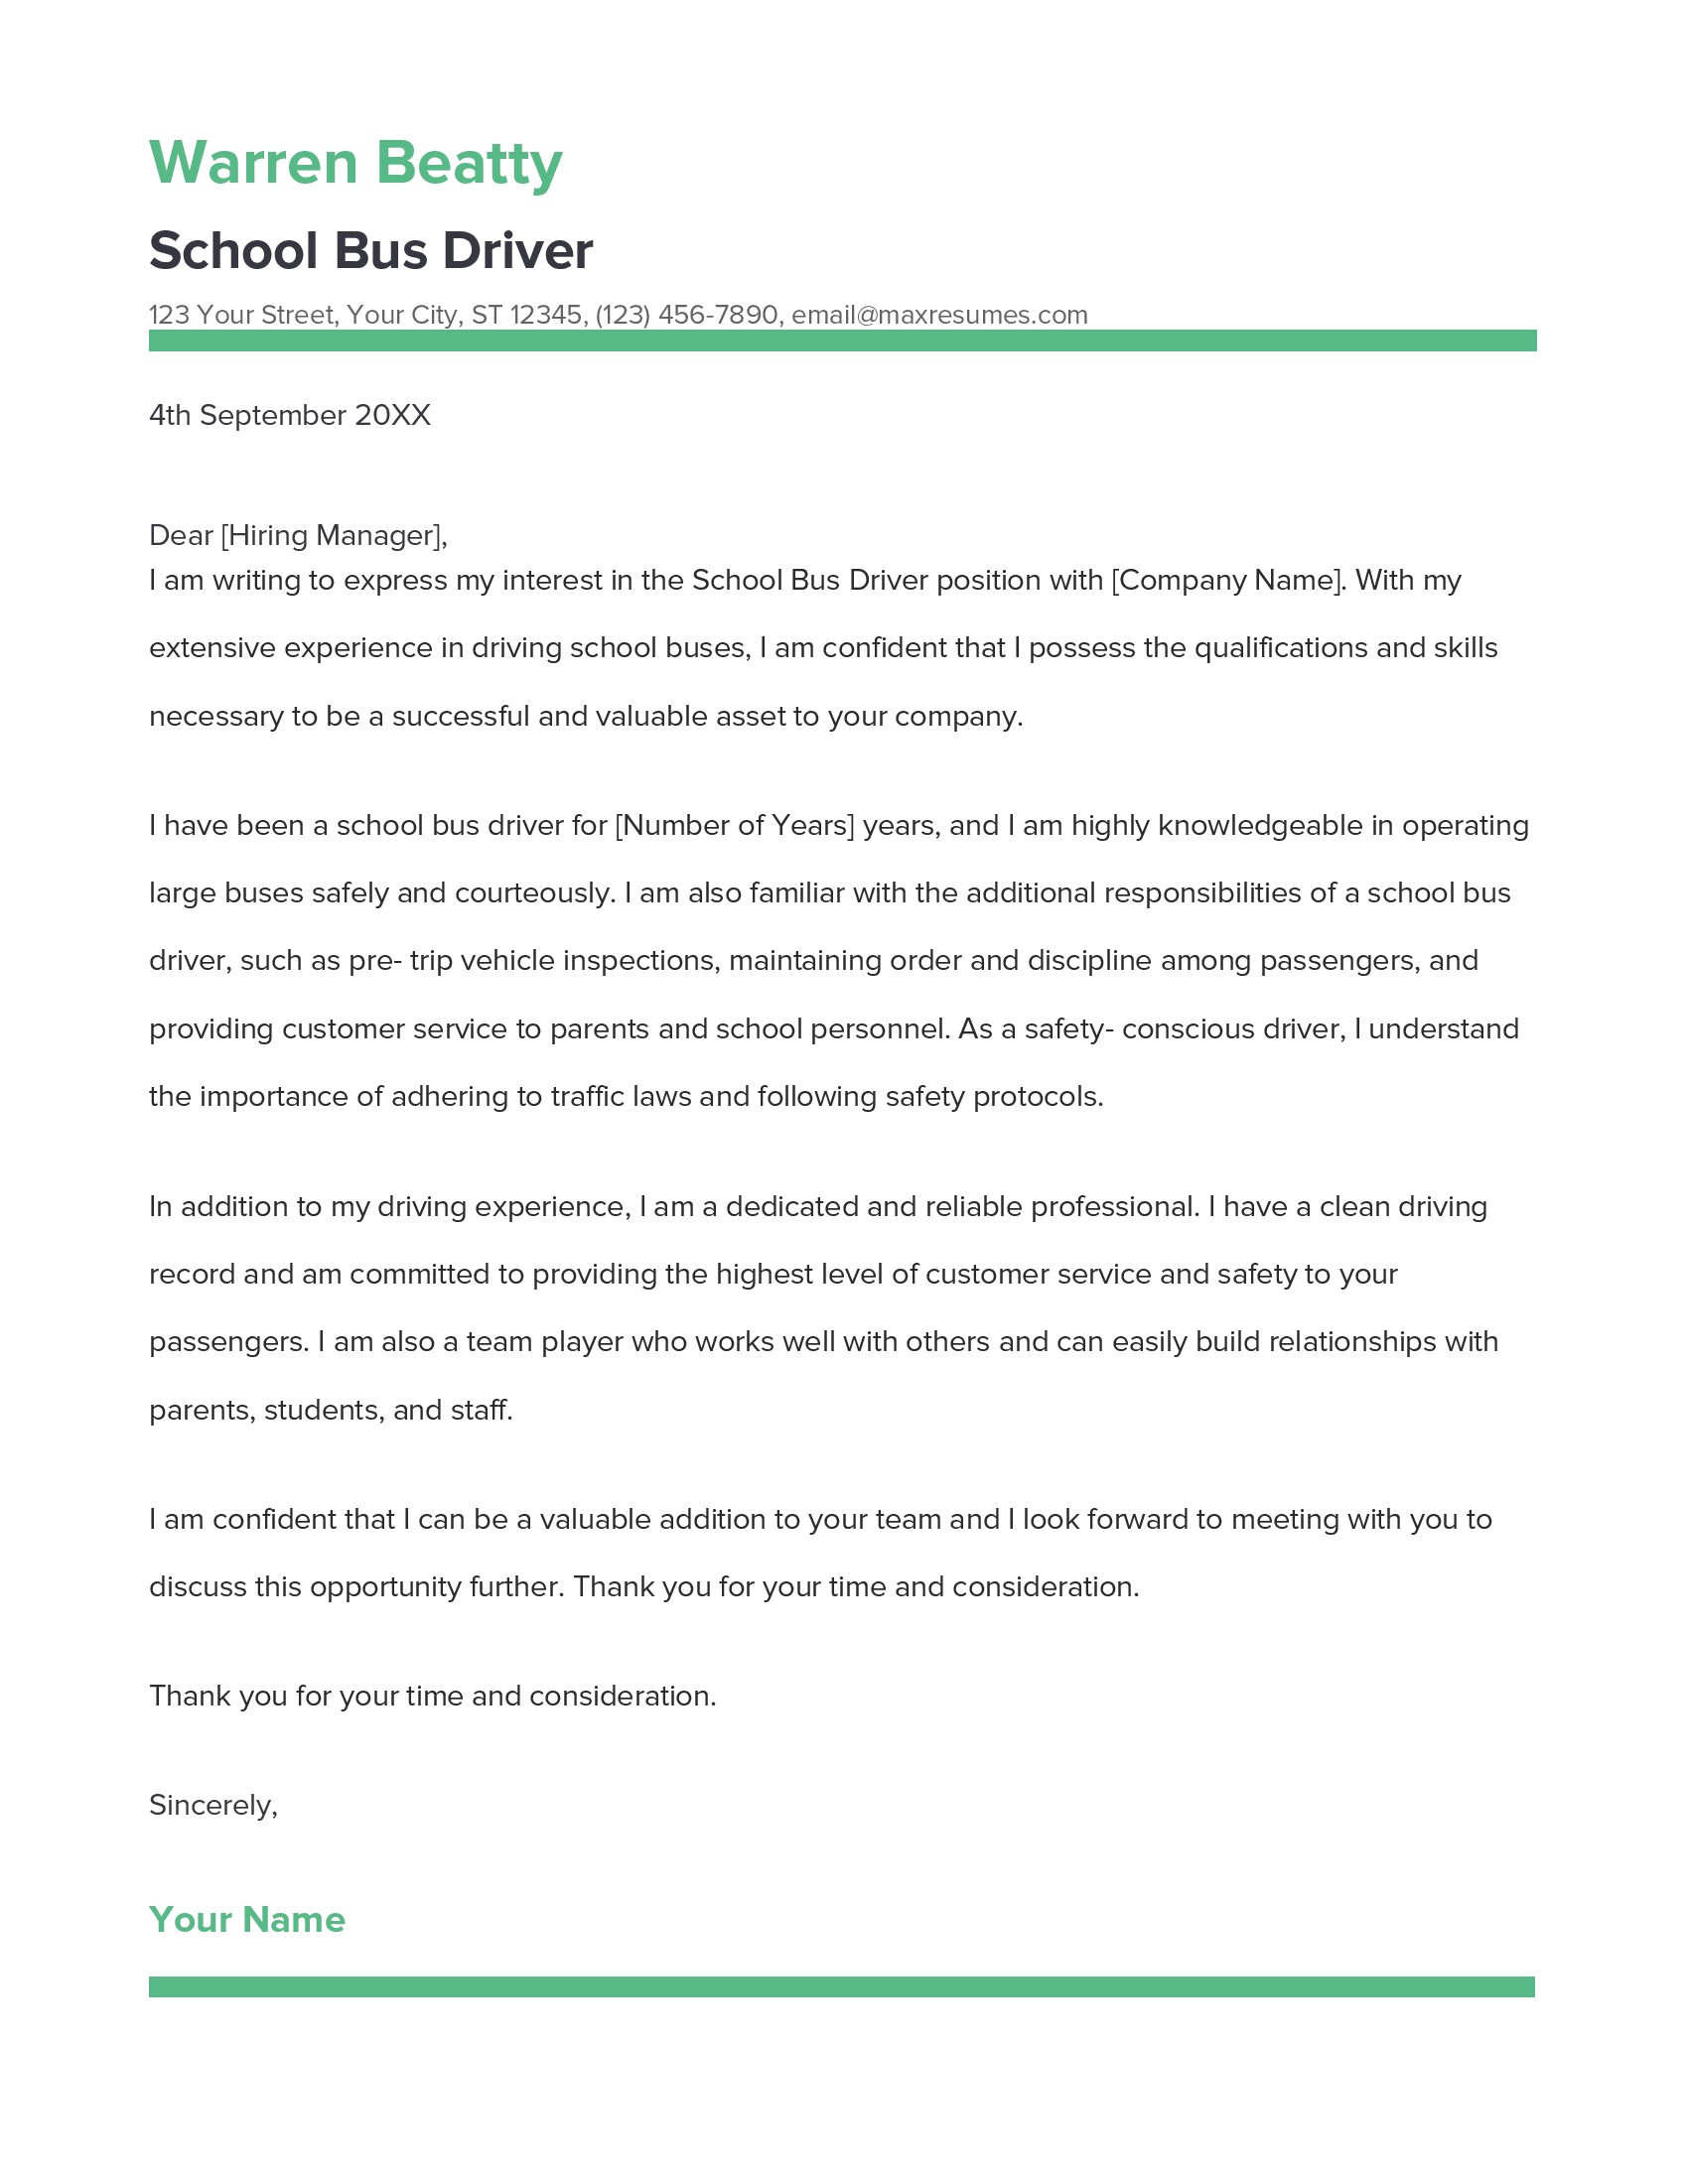 School Bus Driver Cover Letter Example